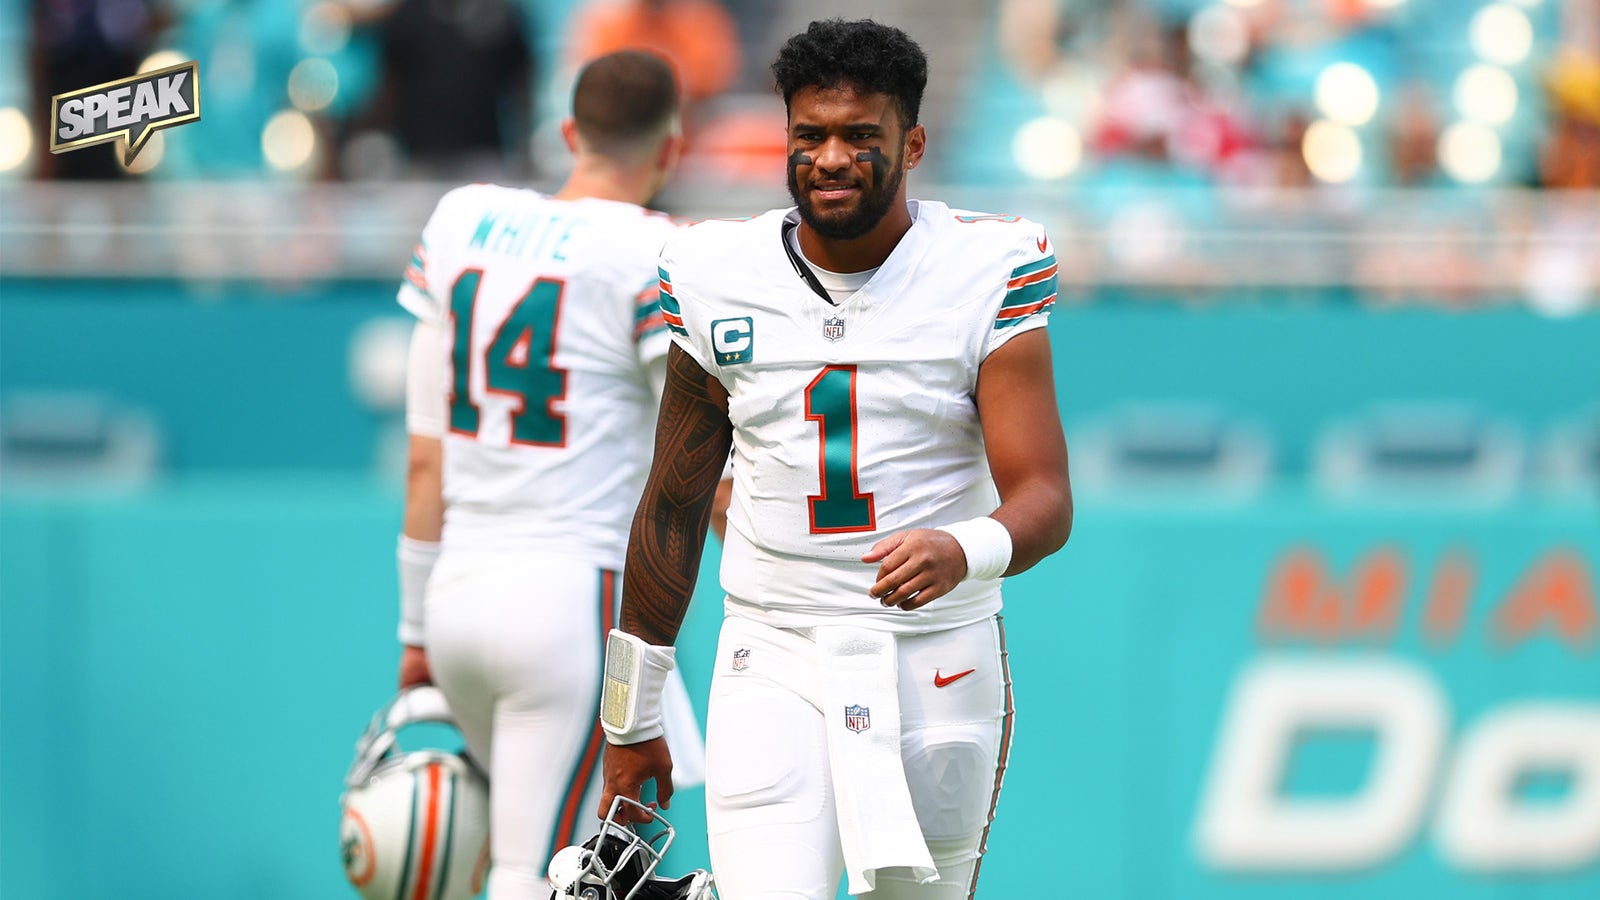 Time to question Dolphins after dropping to 0-3 vs .500 teams?